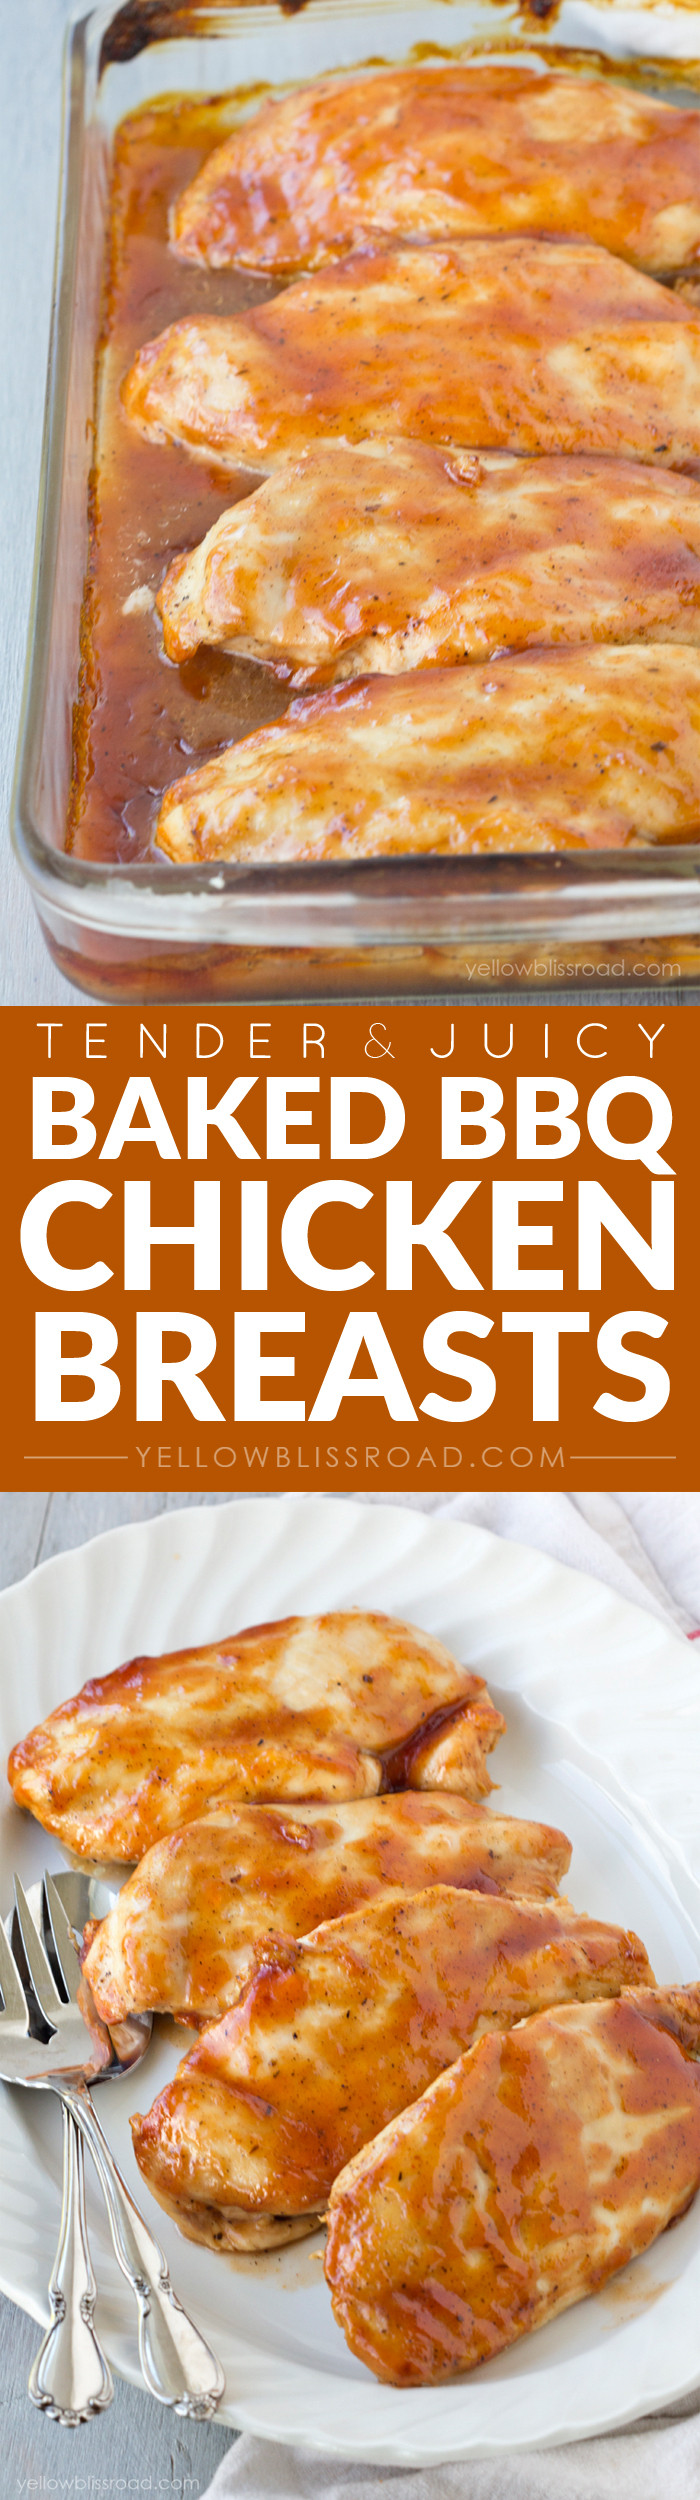 Oven Baked Bbq Chicken Breast
 Baked Barbecue Chicken Yellow Bliss Road